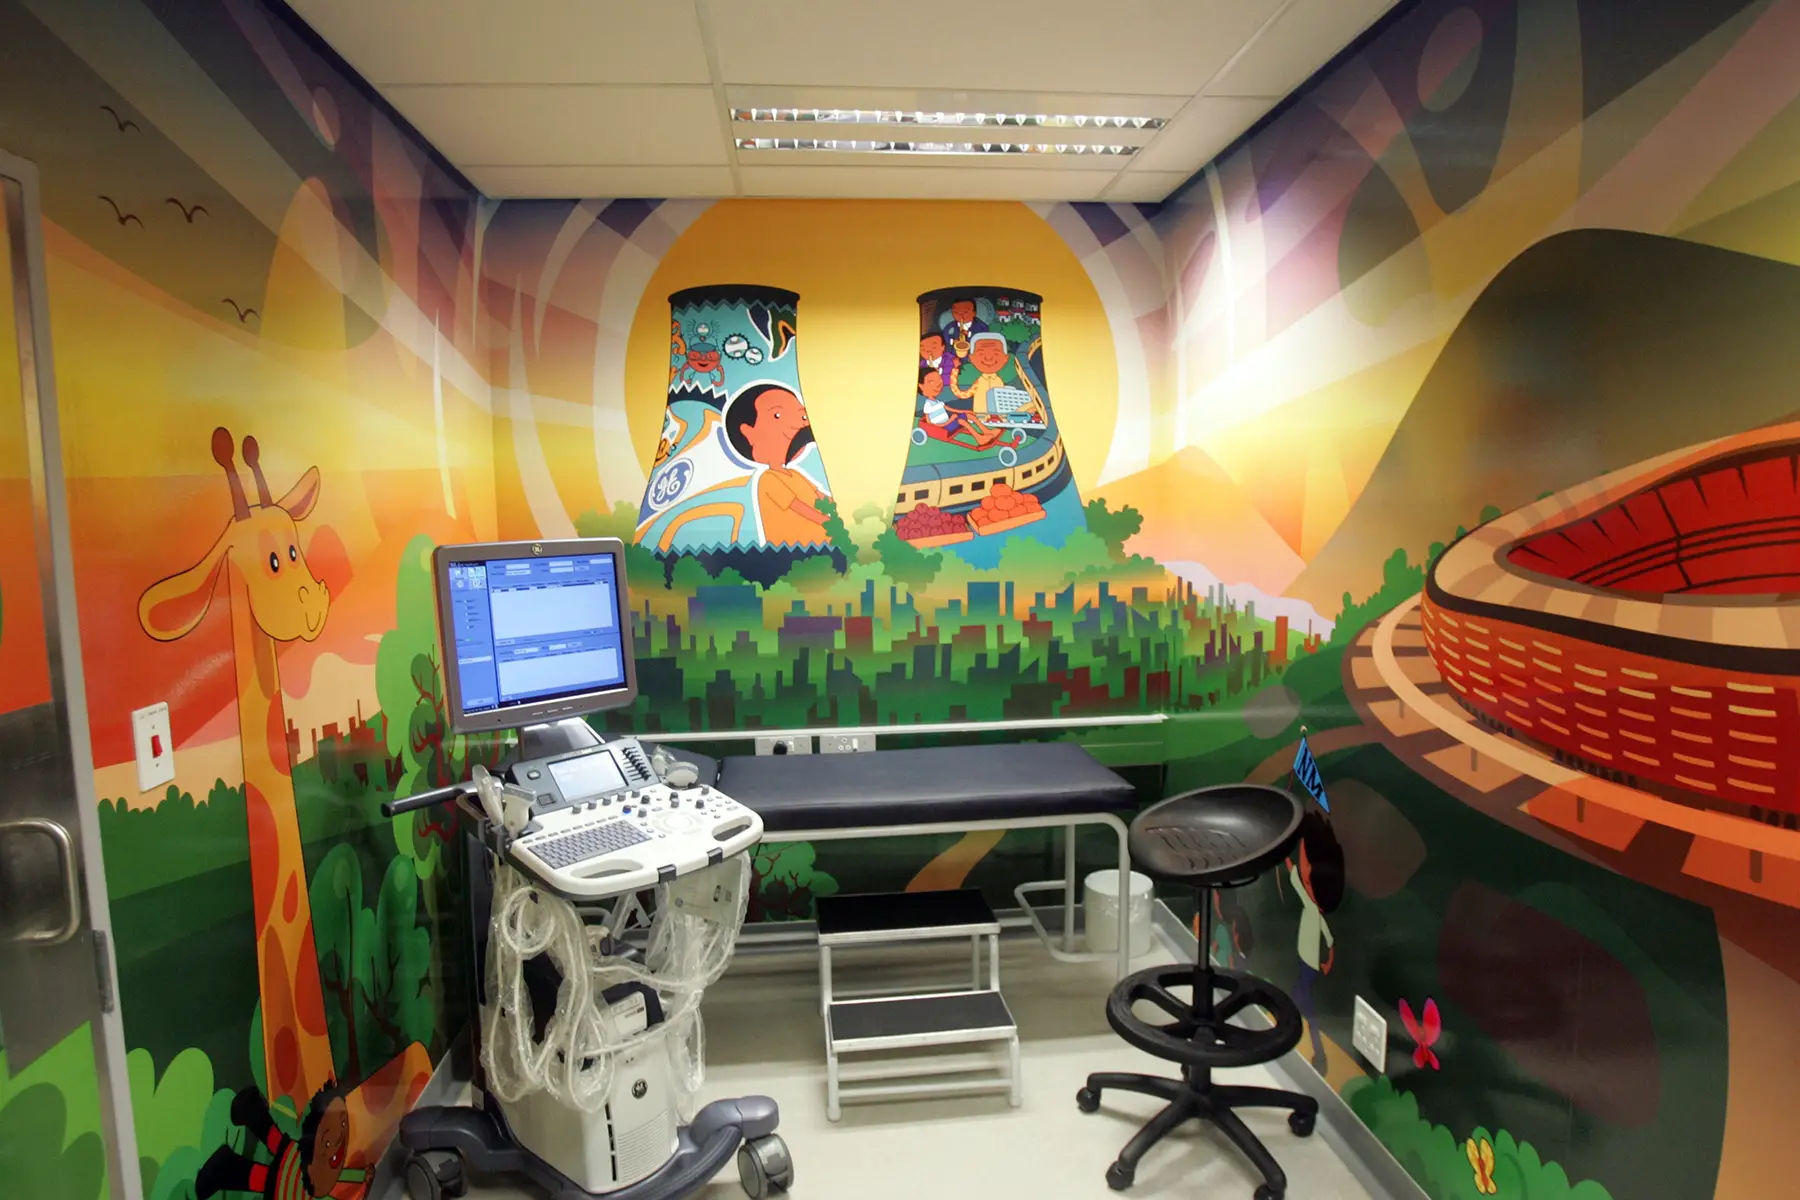 Facilities at a children's hospital in Johannesburg, South Africa